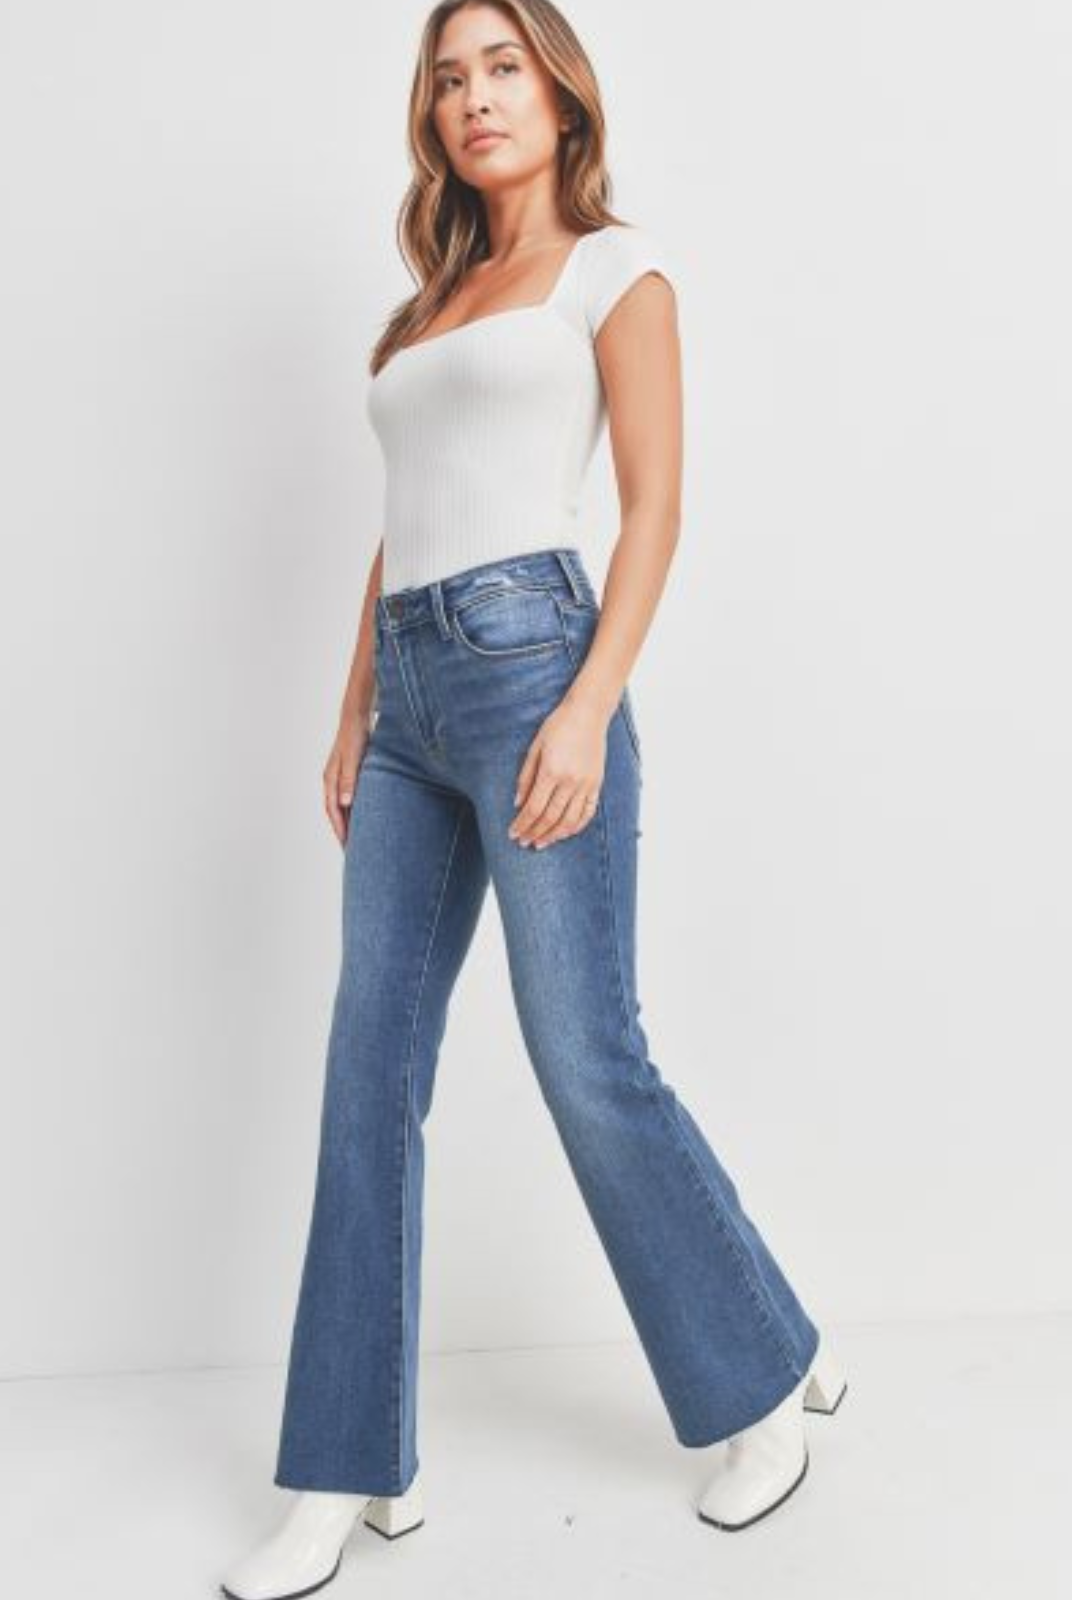 Just Black Flare Jean. Get ready to fall in love with our favorite jean of the season. We took this classic silhouette, and gave it an updated wash and scissor cut hem to make it the ultimate jean for dressing up and dressing down.